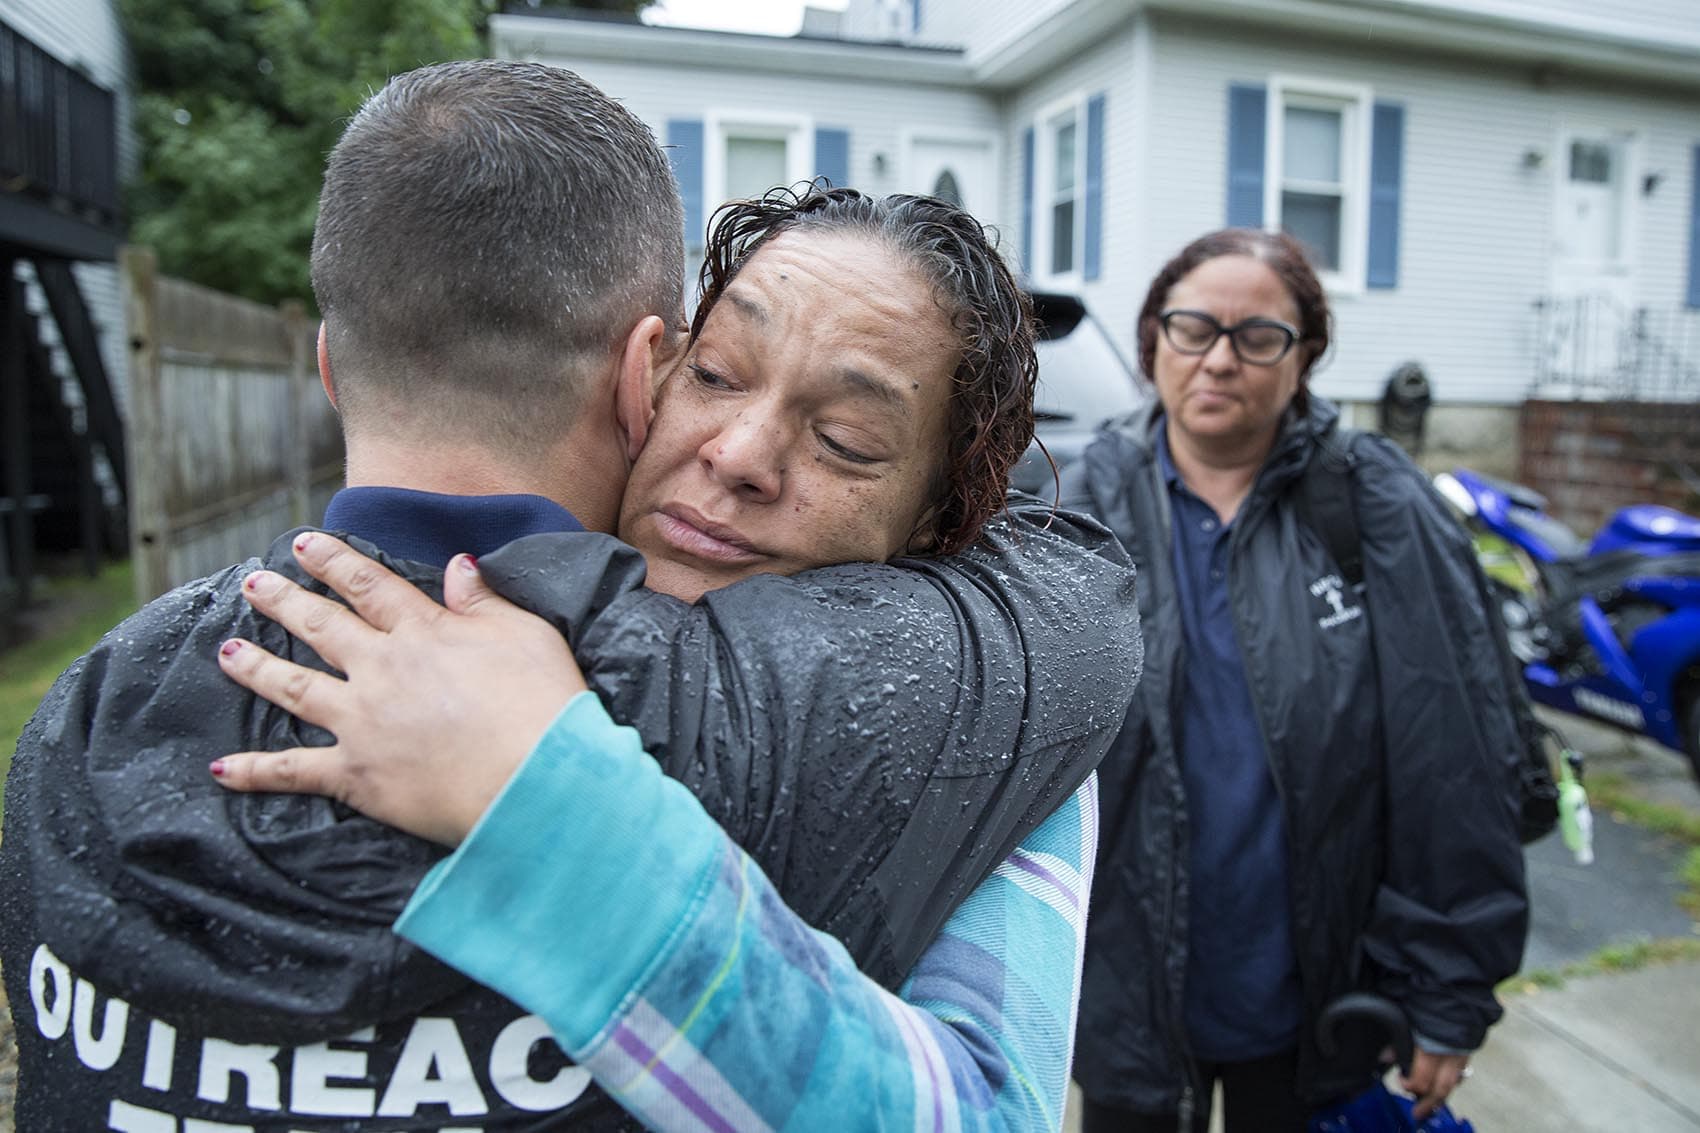 In New Bedford, outreach teams made up of of a police officer, a member of the clergy, and a counselor go out three nights a week looking for people who've recently survived an opioid overdose to try to get them into treatment. Here, Tenelle Pina hugs Pastor Jamie Casey and tells him she's ready to go to detox. (Robin Lubbock/WBUR)